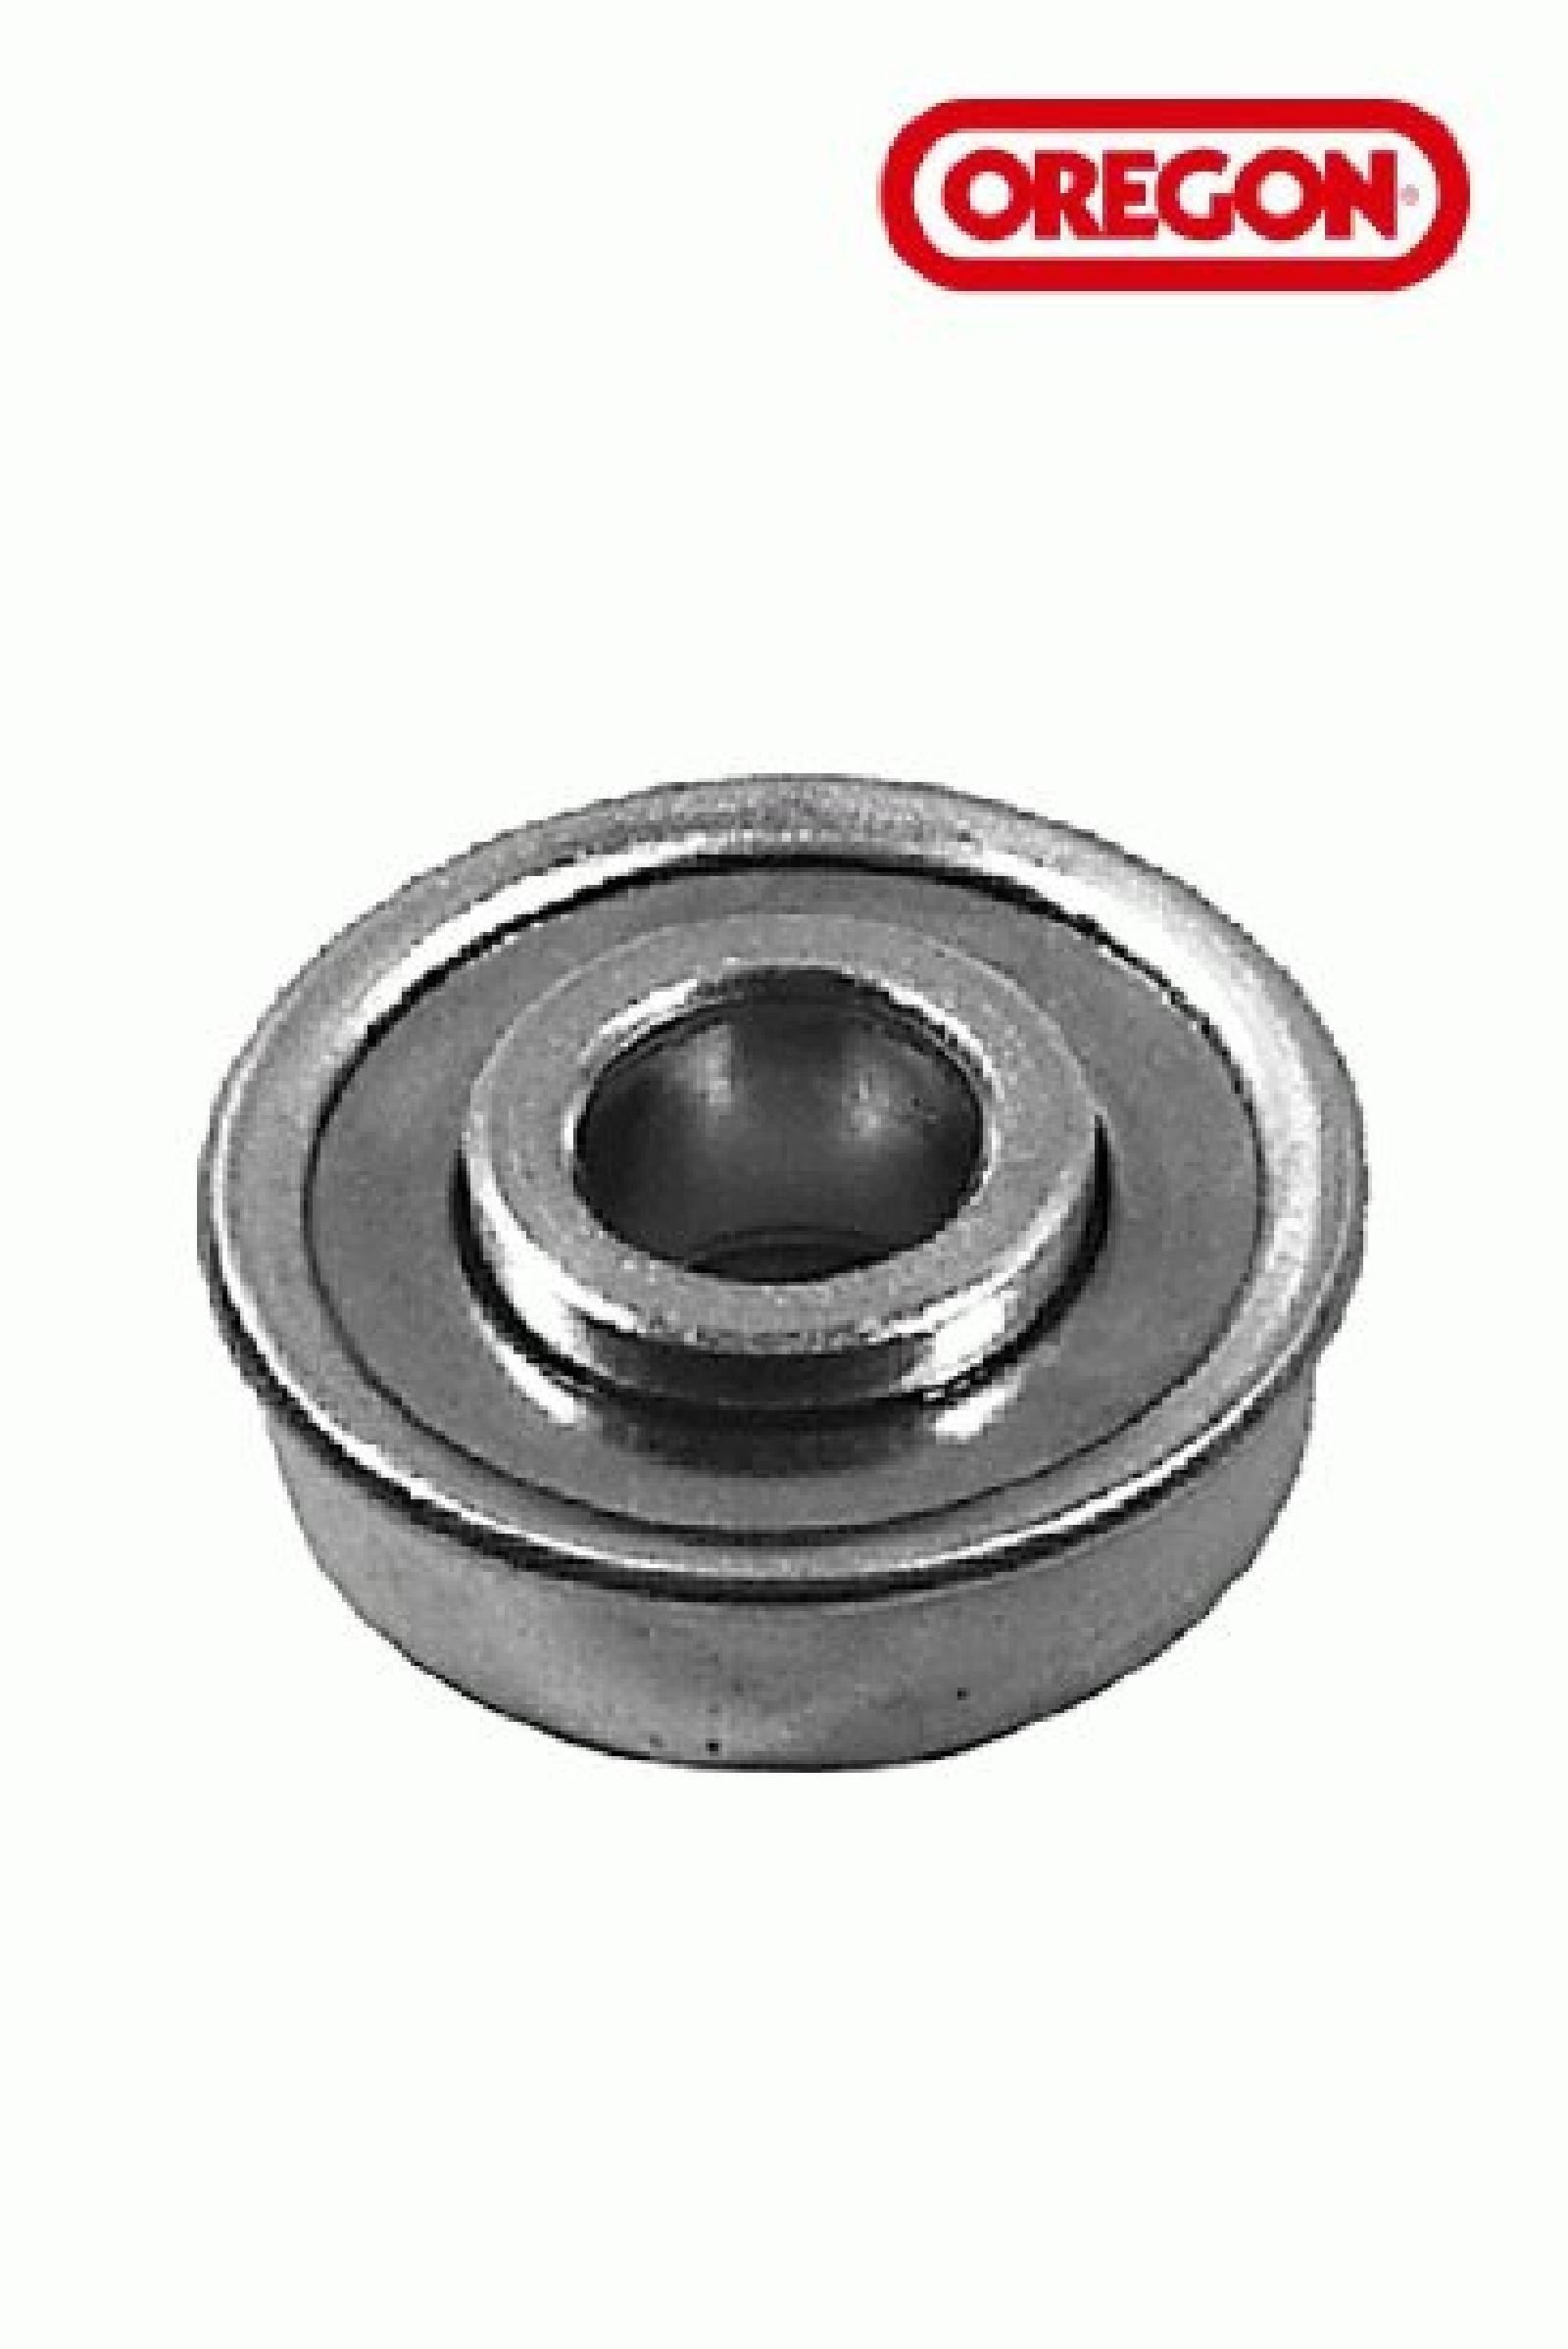 BEARNG, FLANGED BALL 1/2I part# 45-112 by Oregon - Click Image to Close